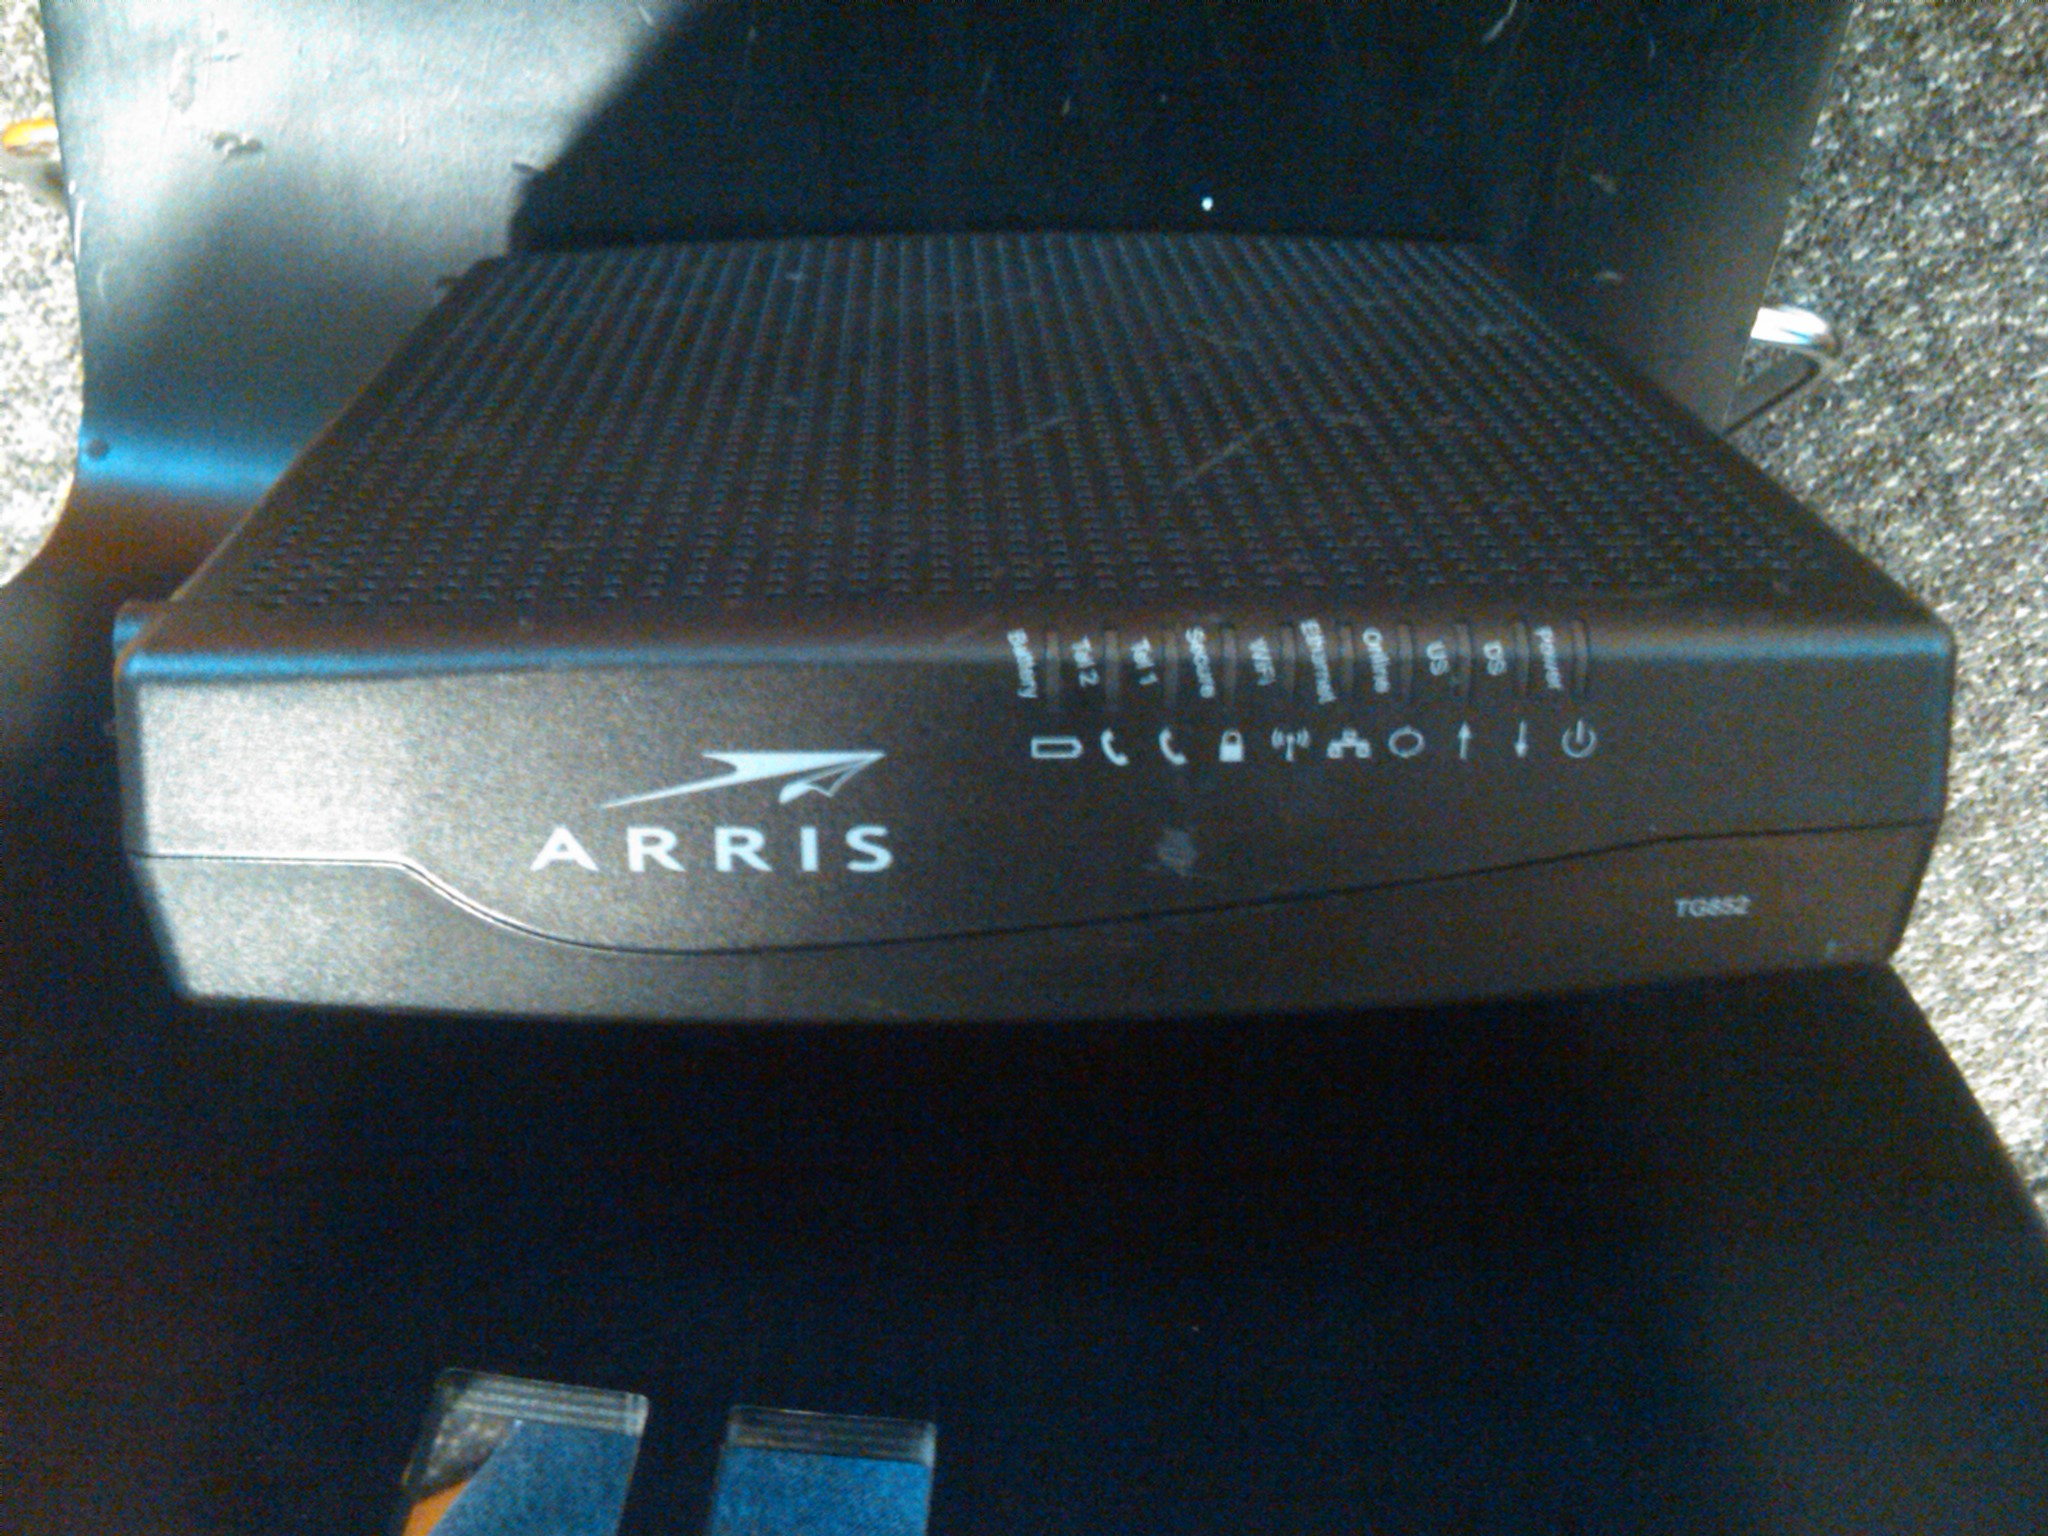 This is the modem I received